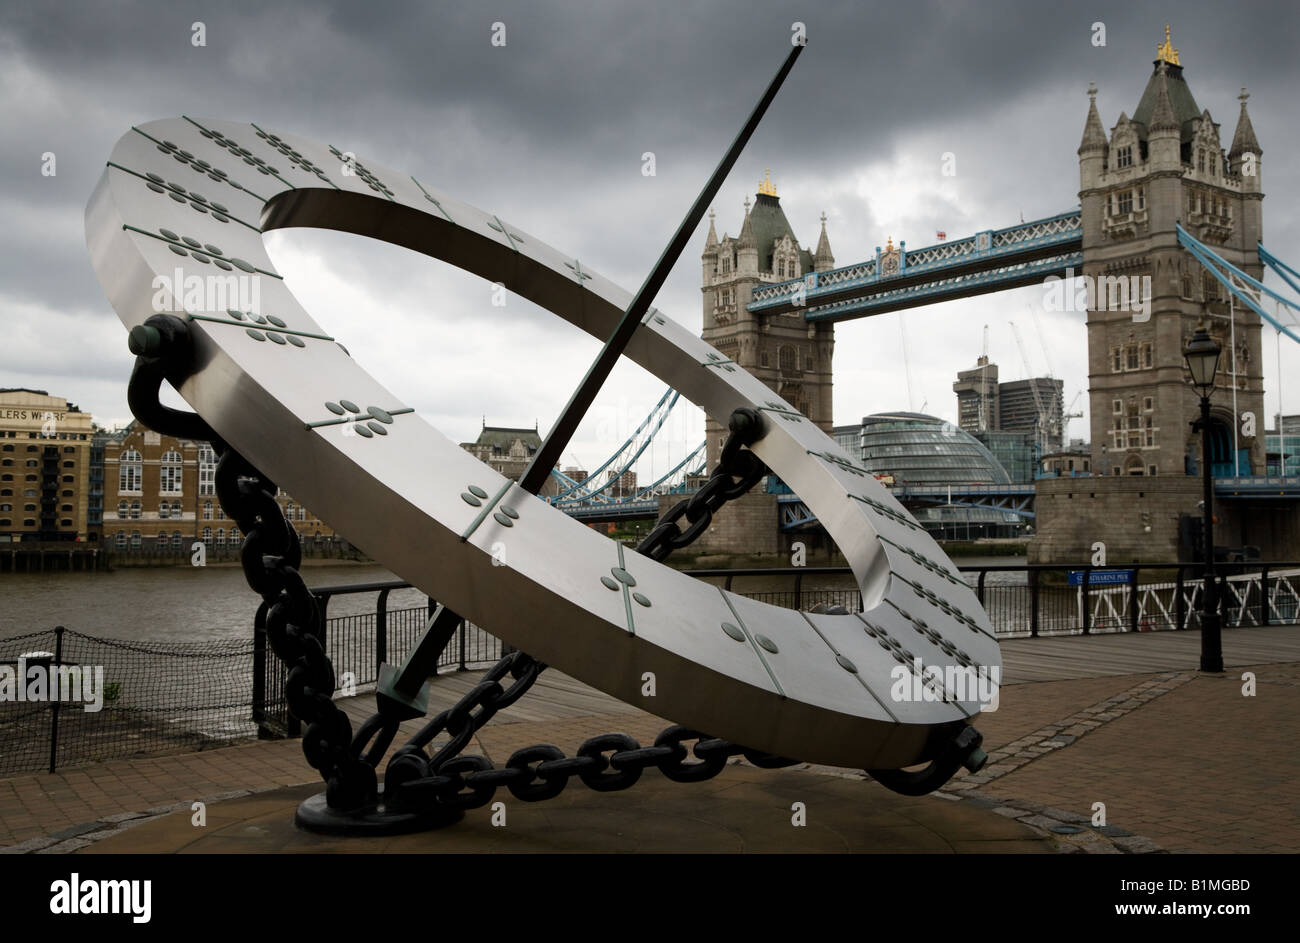 The timepiece sculpture is a famous London landmark with Tower Bridge in the background Stock Photo